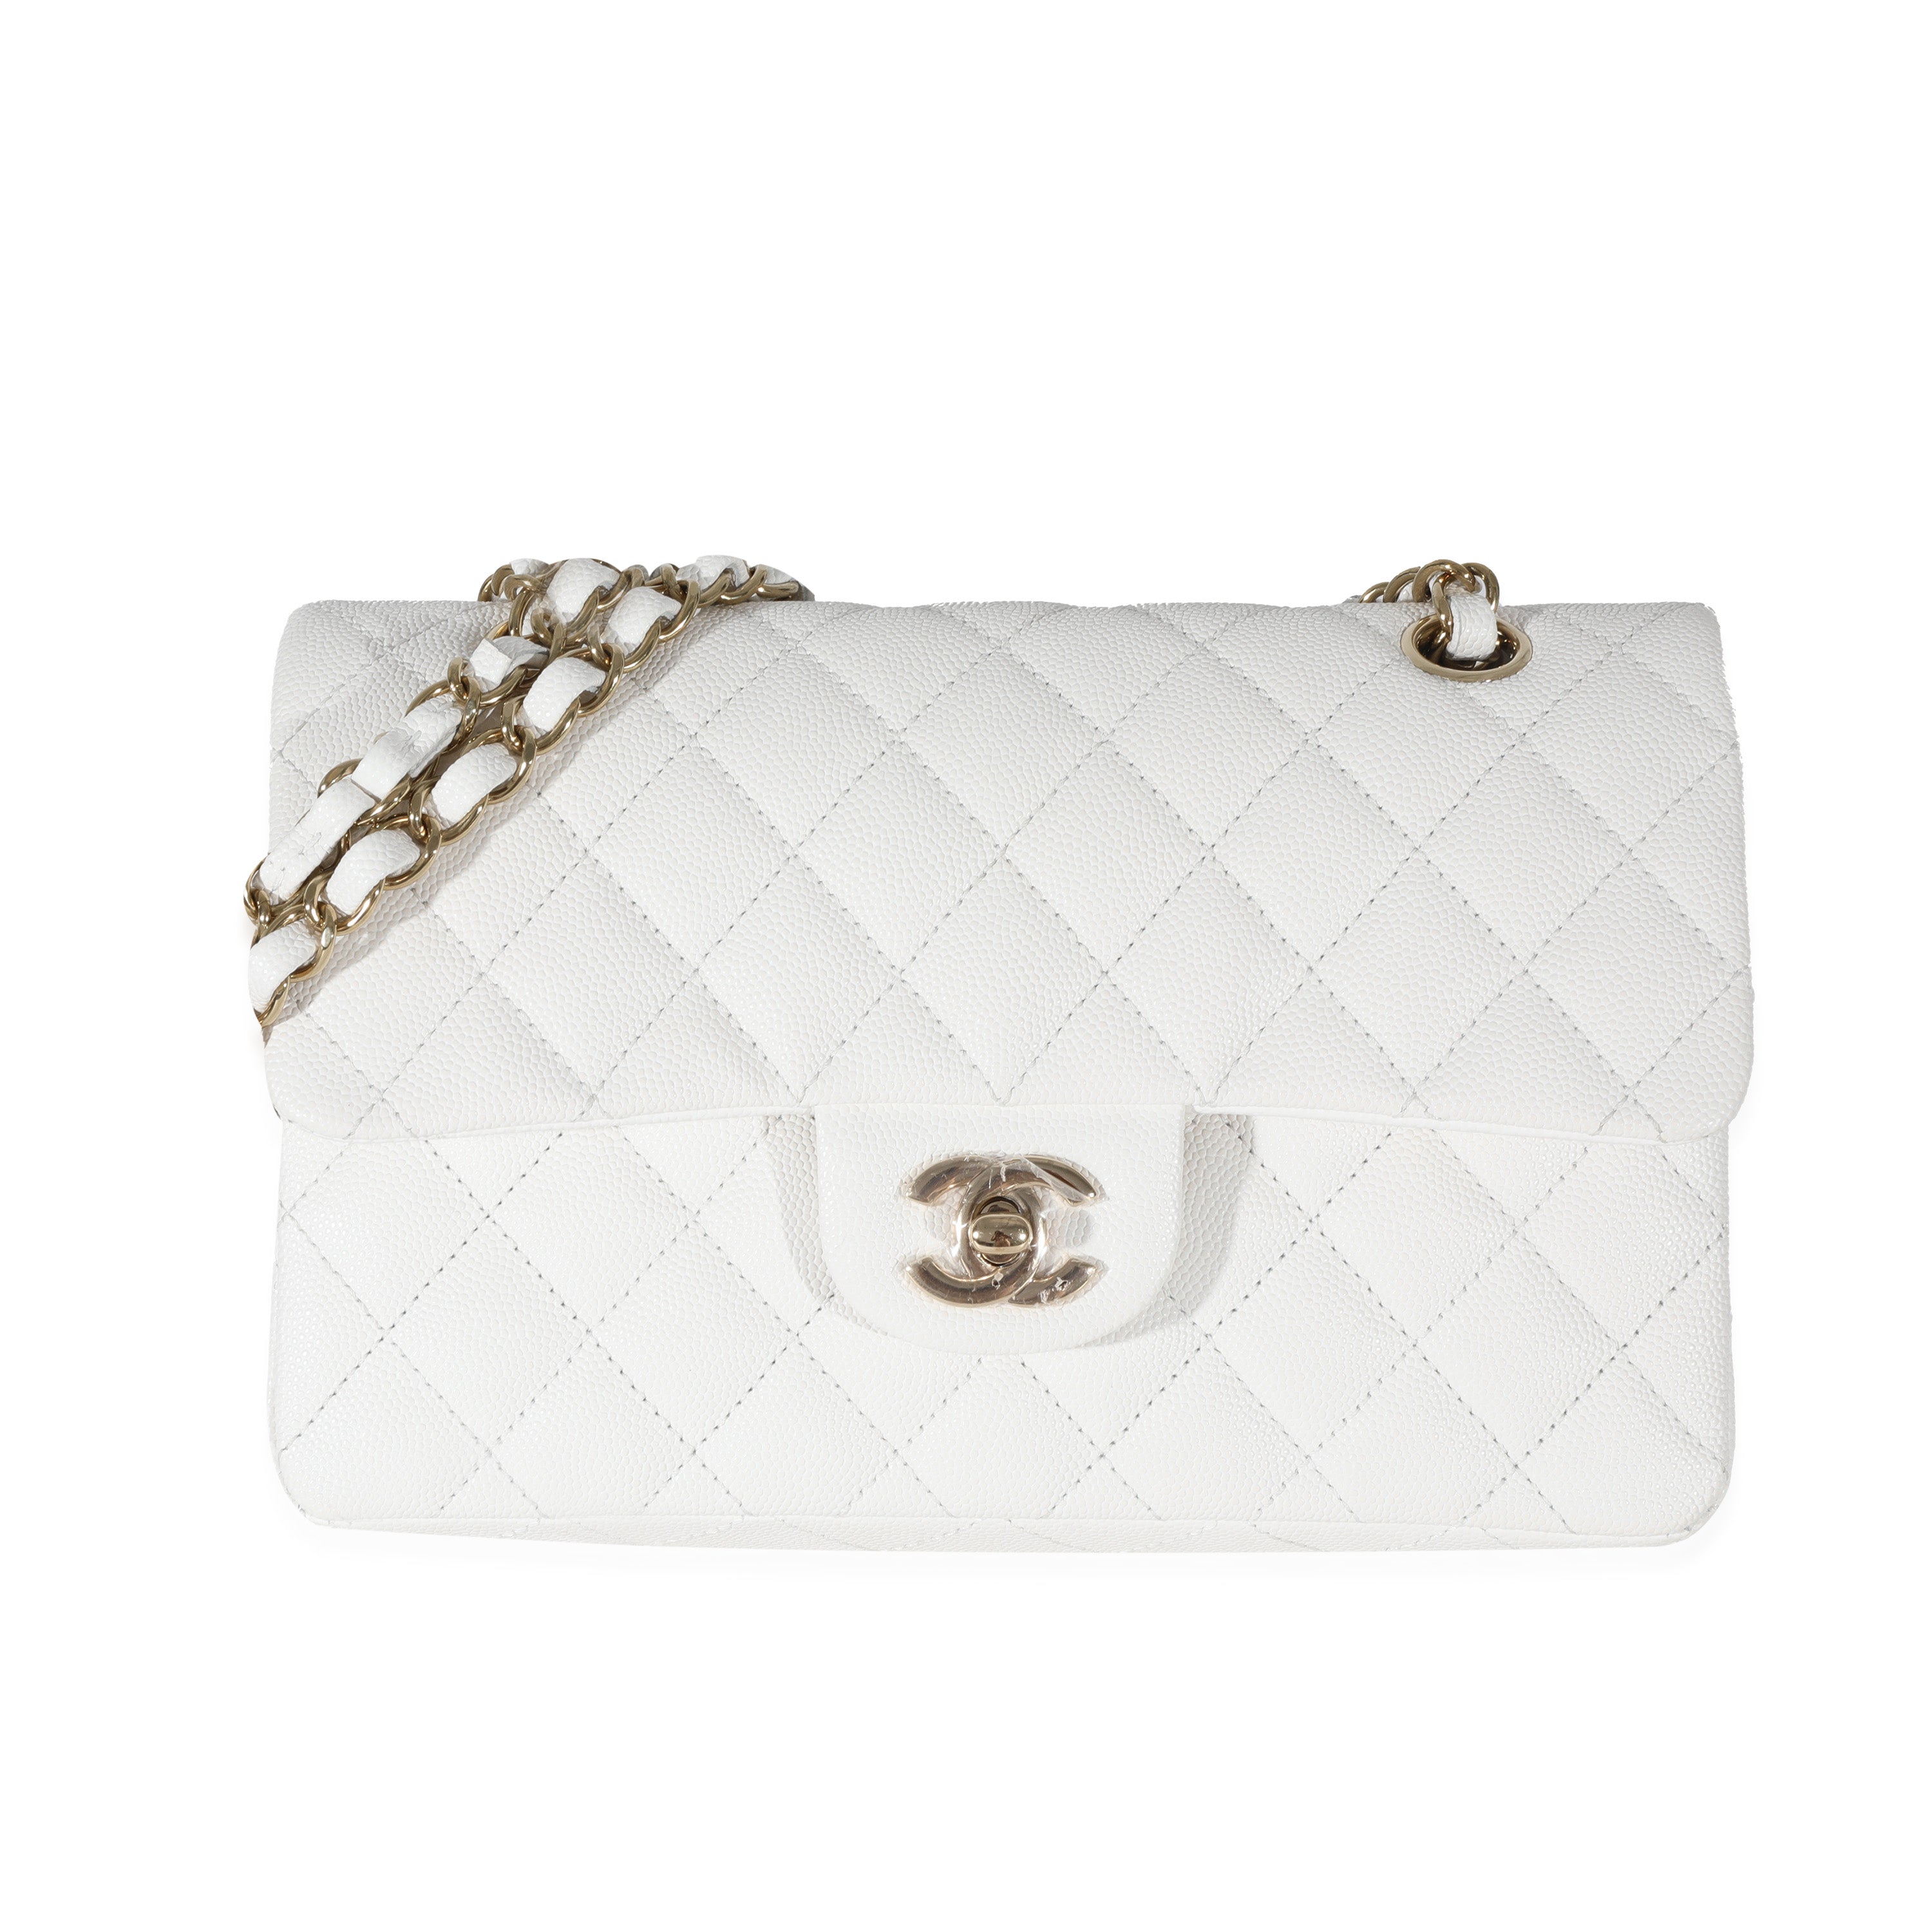 Chanel White Quilted Caviar Gold Chain Shoulder Bag 6ca516 | eBay